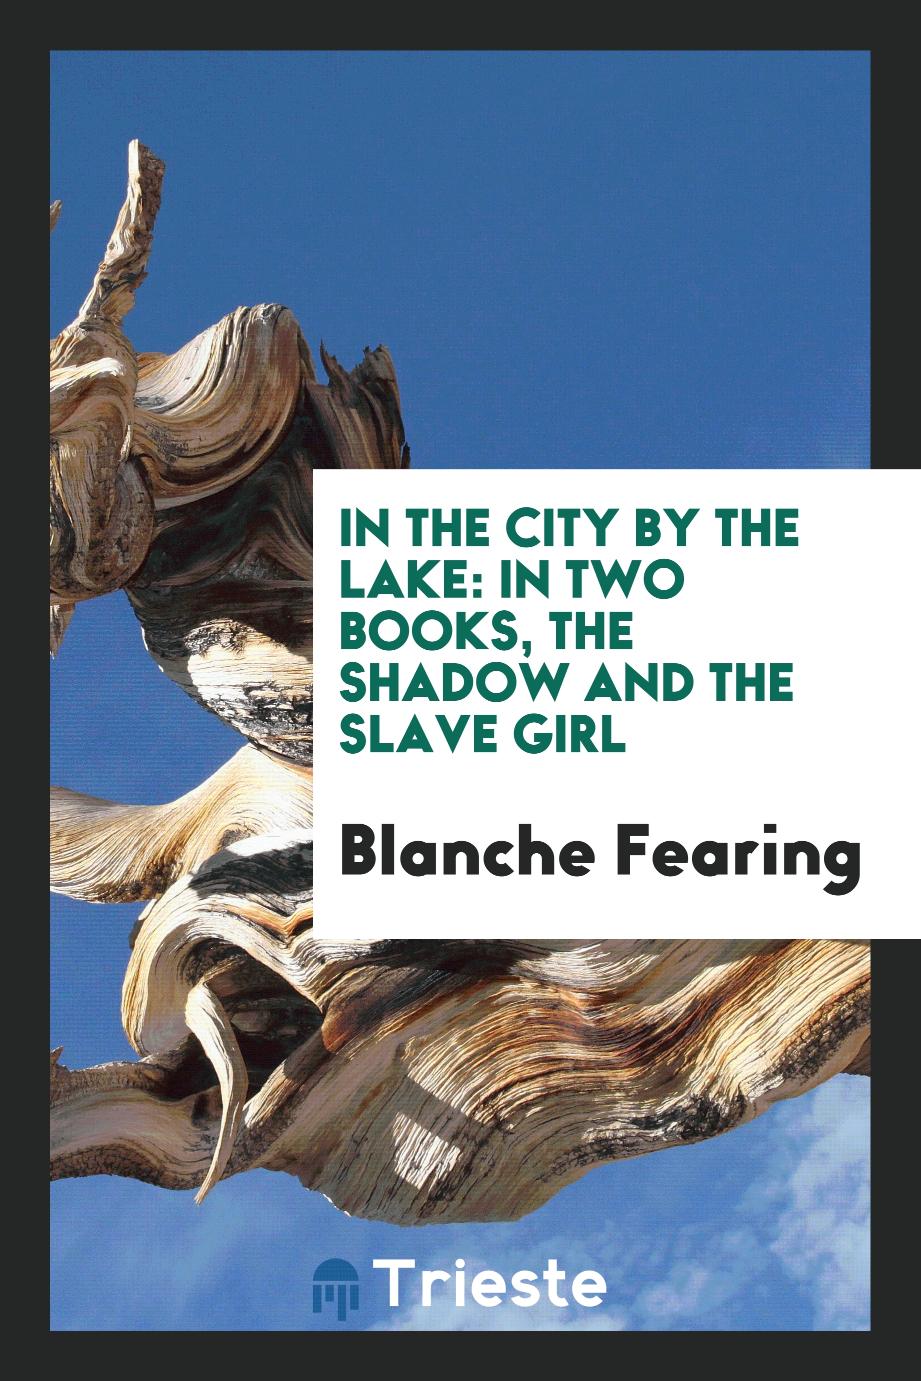 In the City by the Lake: In Two Books, The Shadow and The Slave Girl